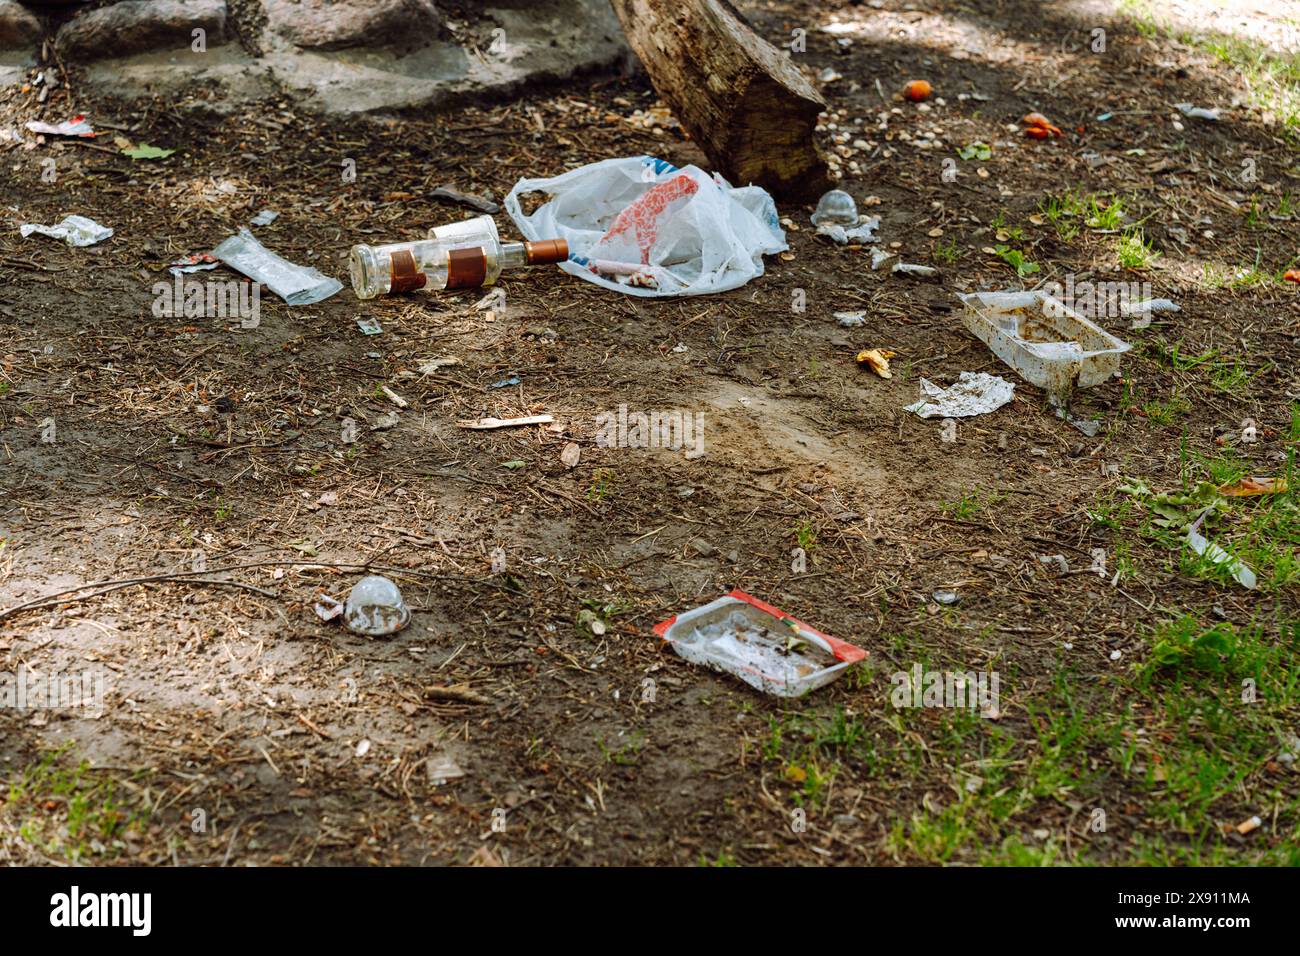 A lot of garbage, plastic bags, food packaging, glass bottles and other things are scattered in a picnic clearing in the forest. Stock Photo